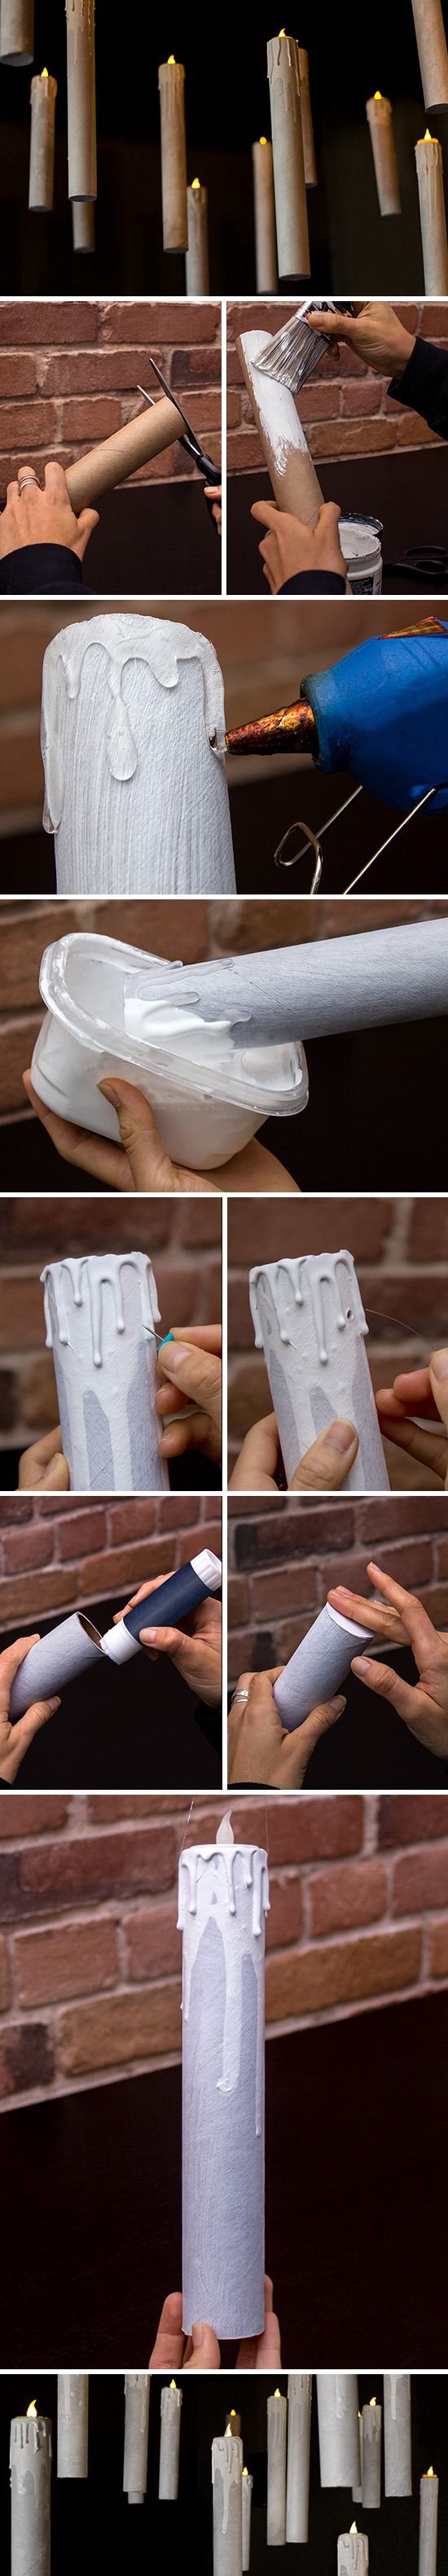 Harry potter Floating Candles Made From Paper Towel Rolls. 